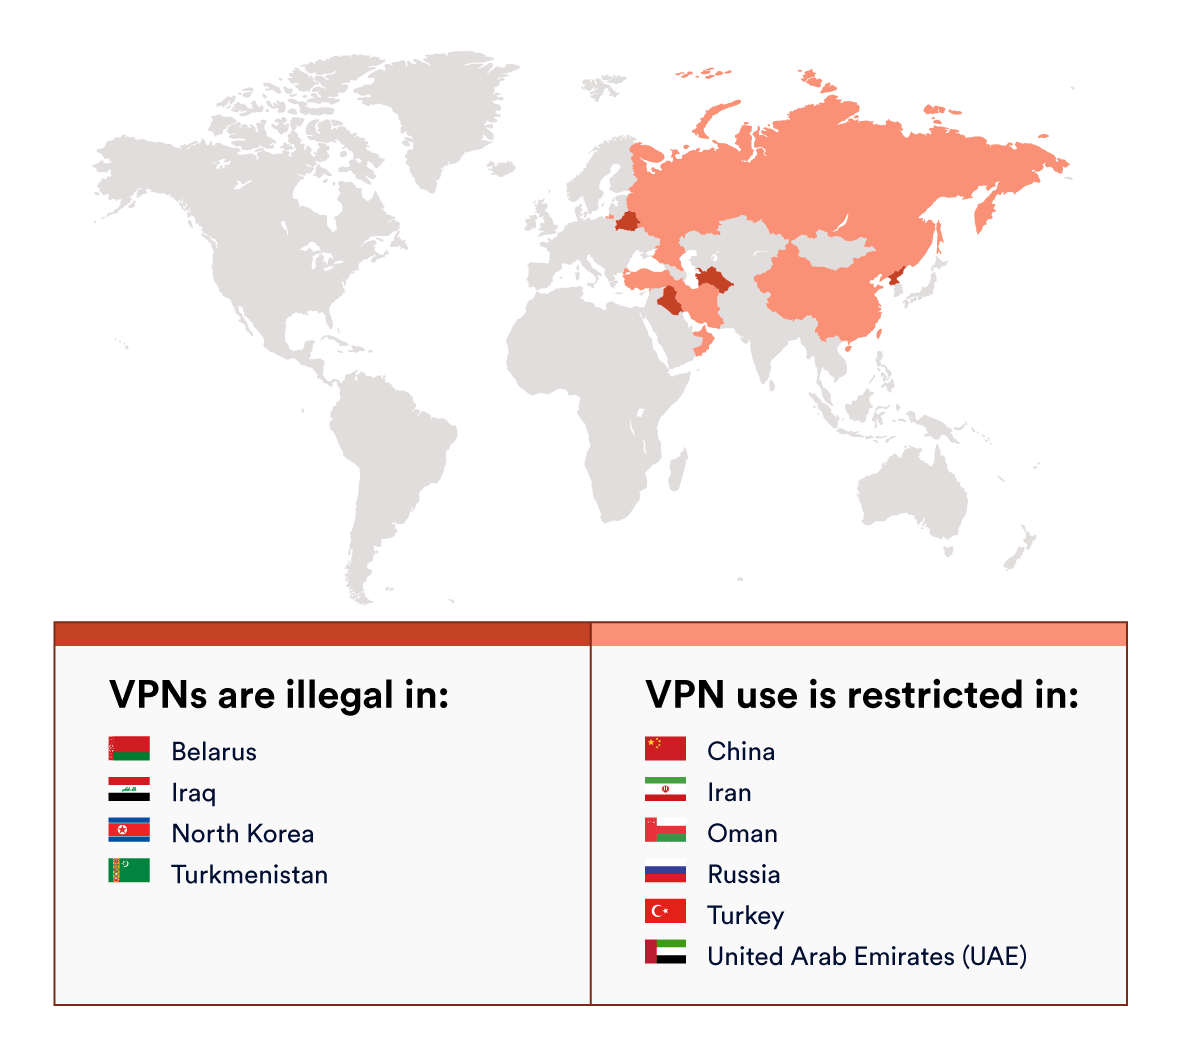 Countries where VPNs are illegal or restricted